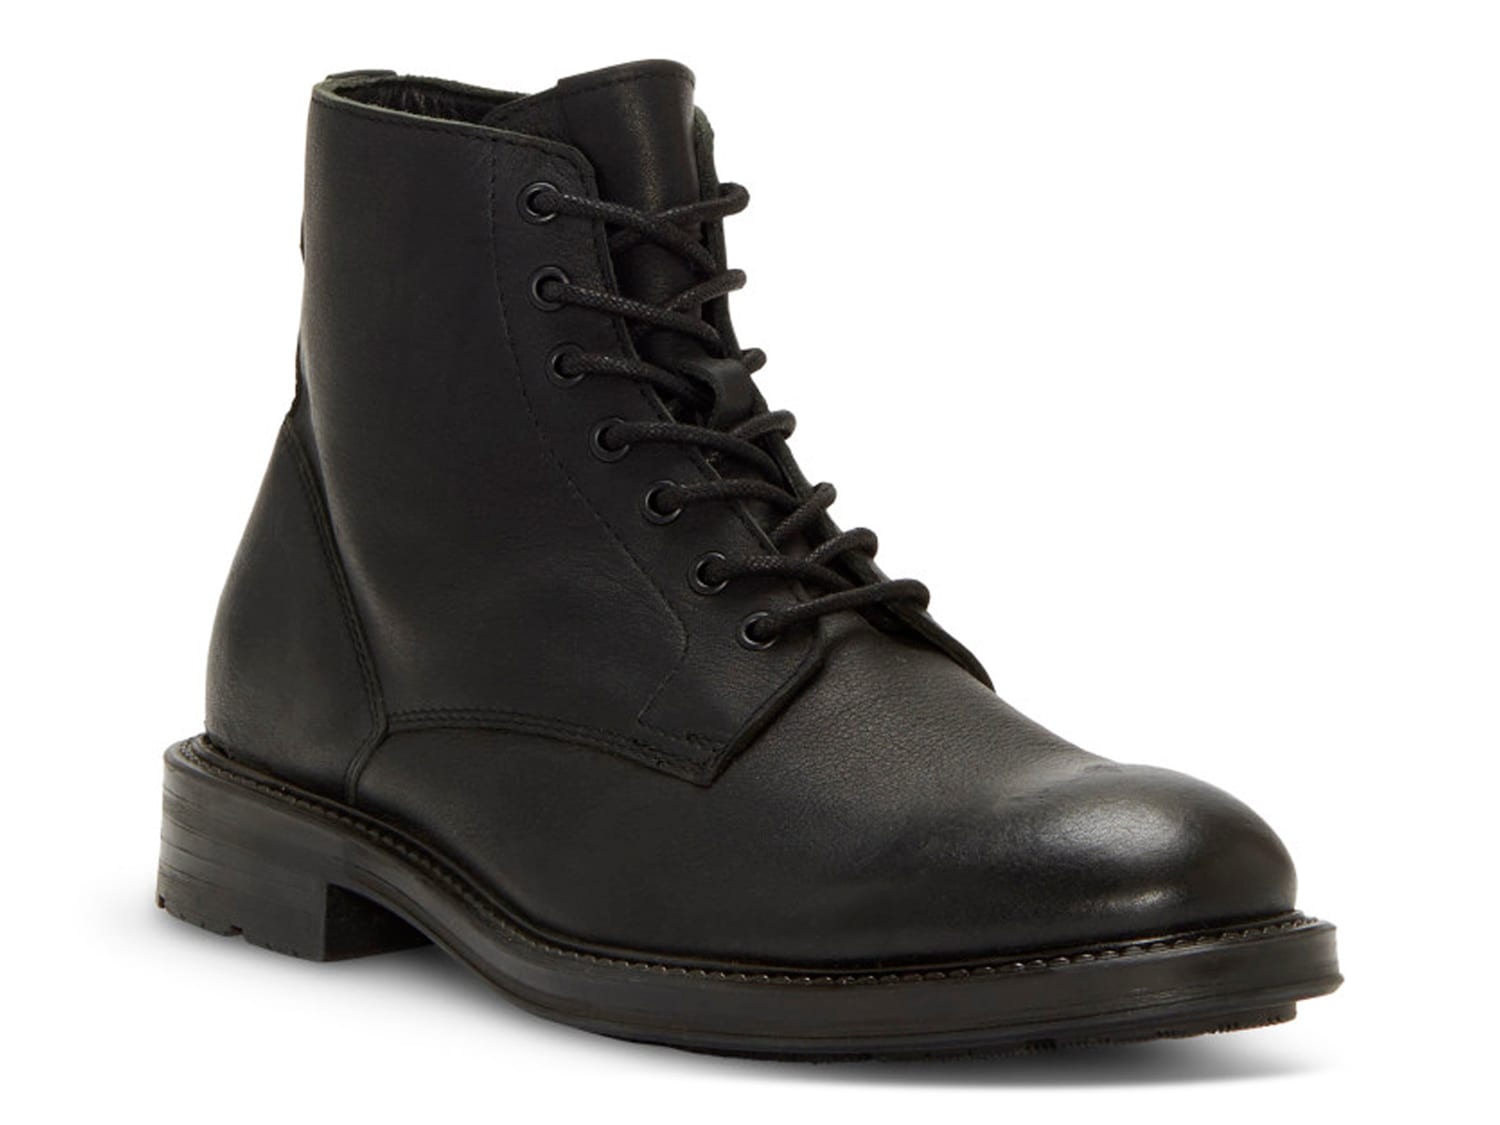 Vince Camuto Langston Boot - Free Shipping | DSW